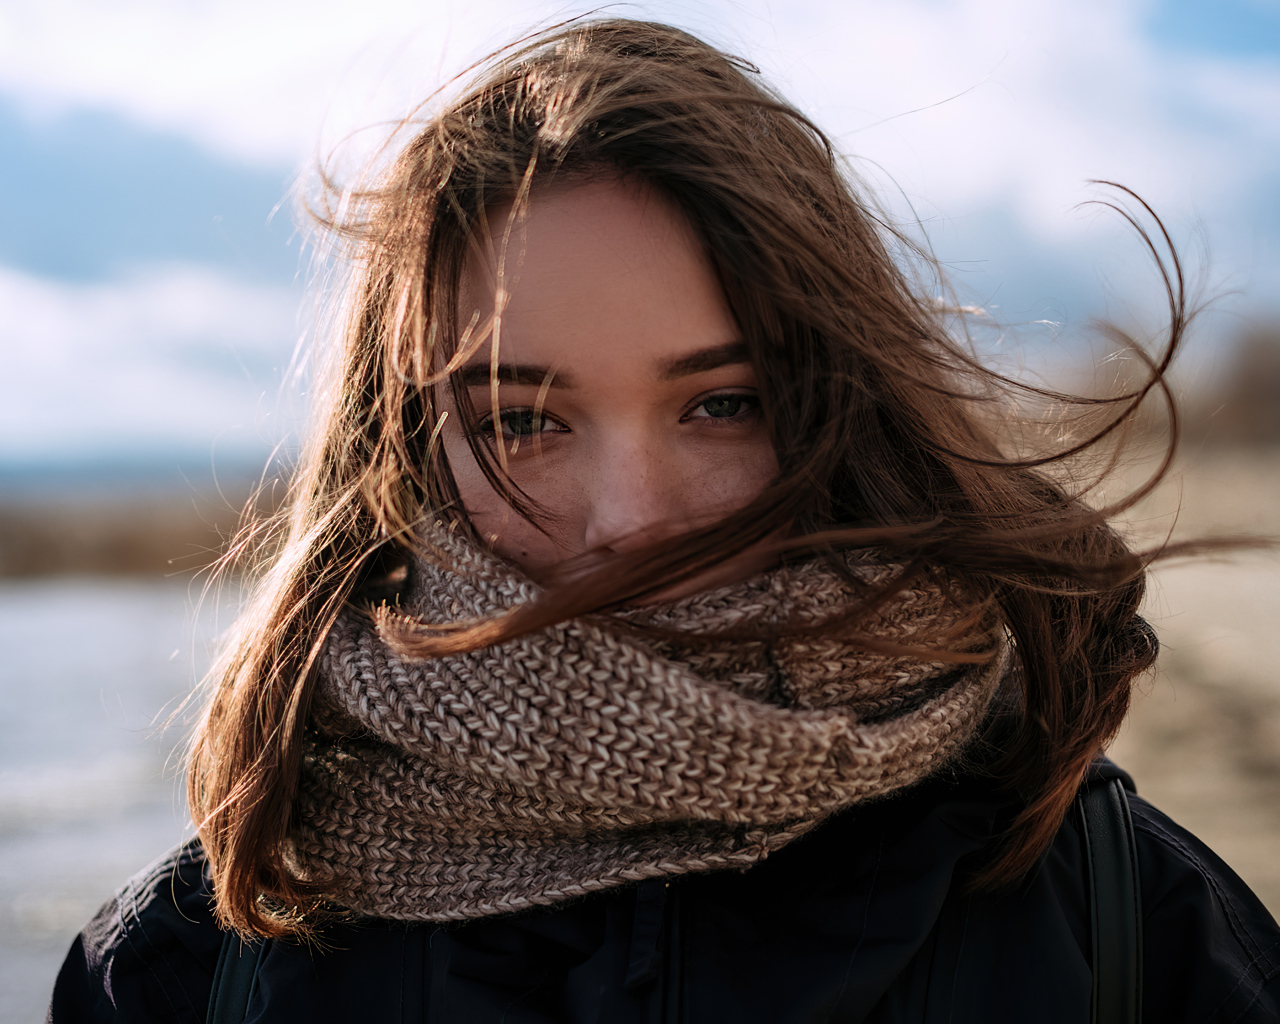 Girl with a warm knitted scarf on her face